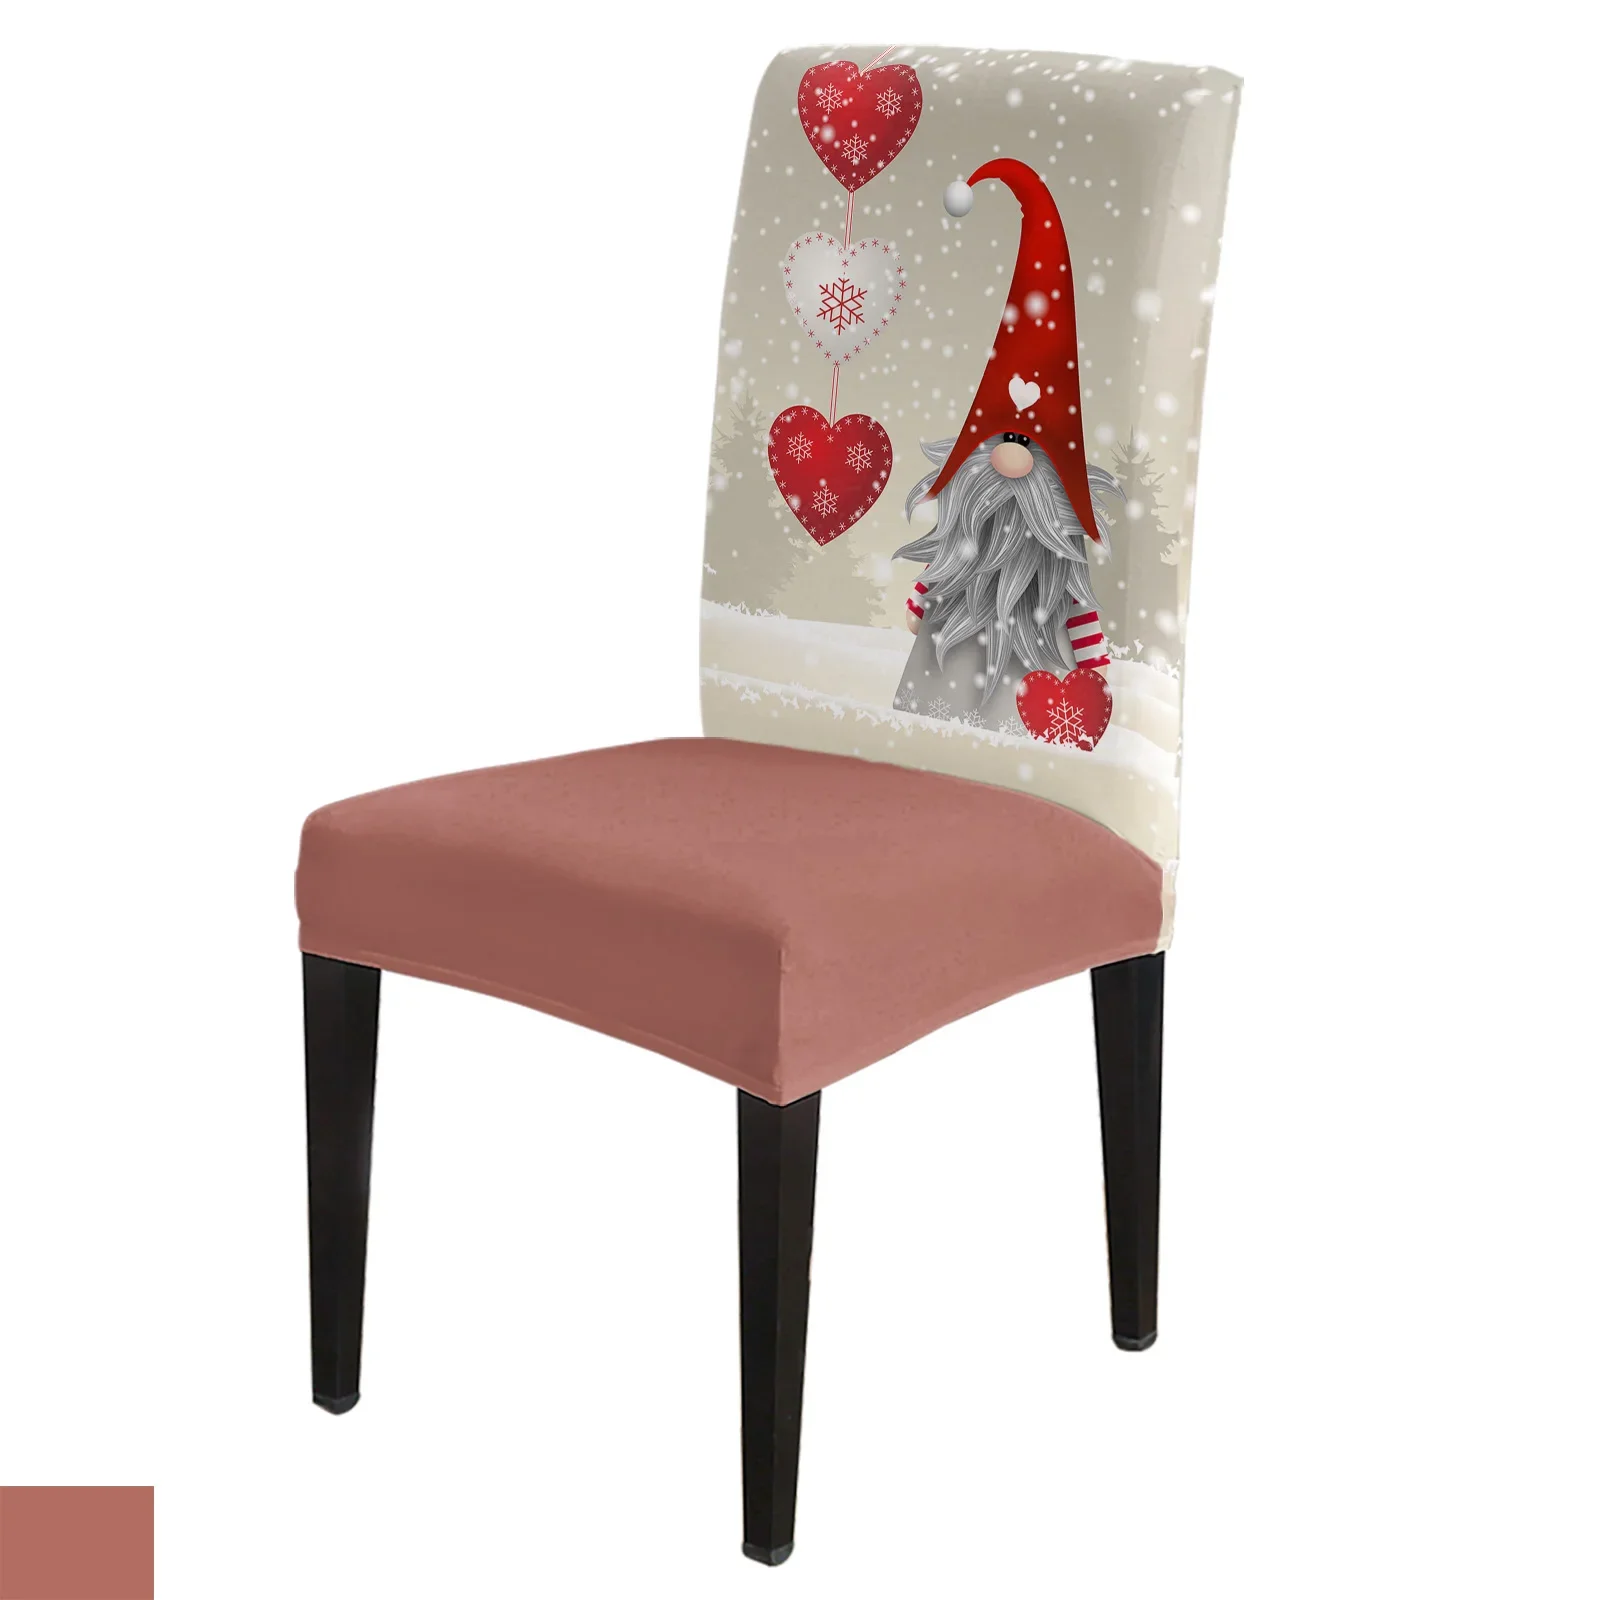 

Christmas Gnome Snowflake Love Heart Dining Chair Covers Spandex Stretch Seat Cover for Wedding Kitchen Banquet Party Seat Case